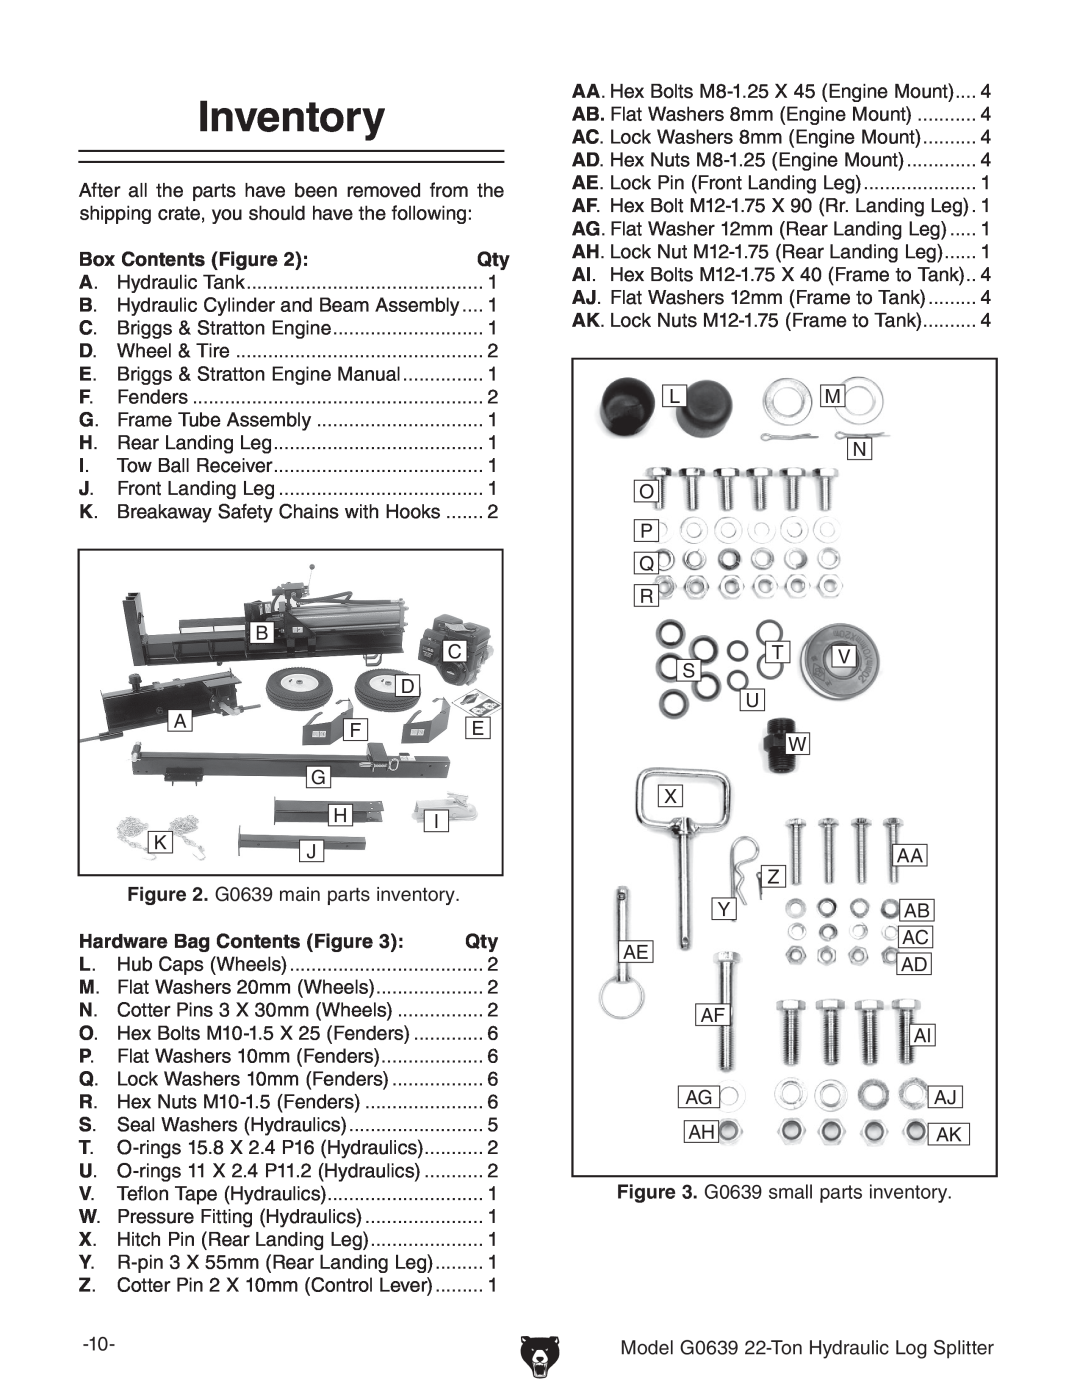 Grizzly G0639 owner manual Inventory, Wheel & Tire, AG. Flat Washer 12mm Rear Landing Leg 